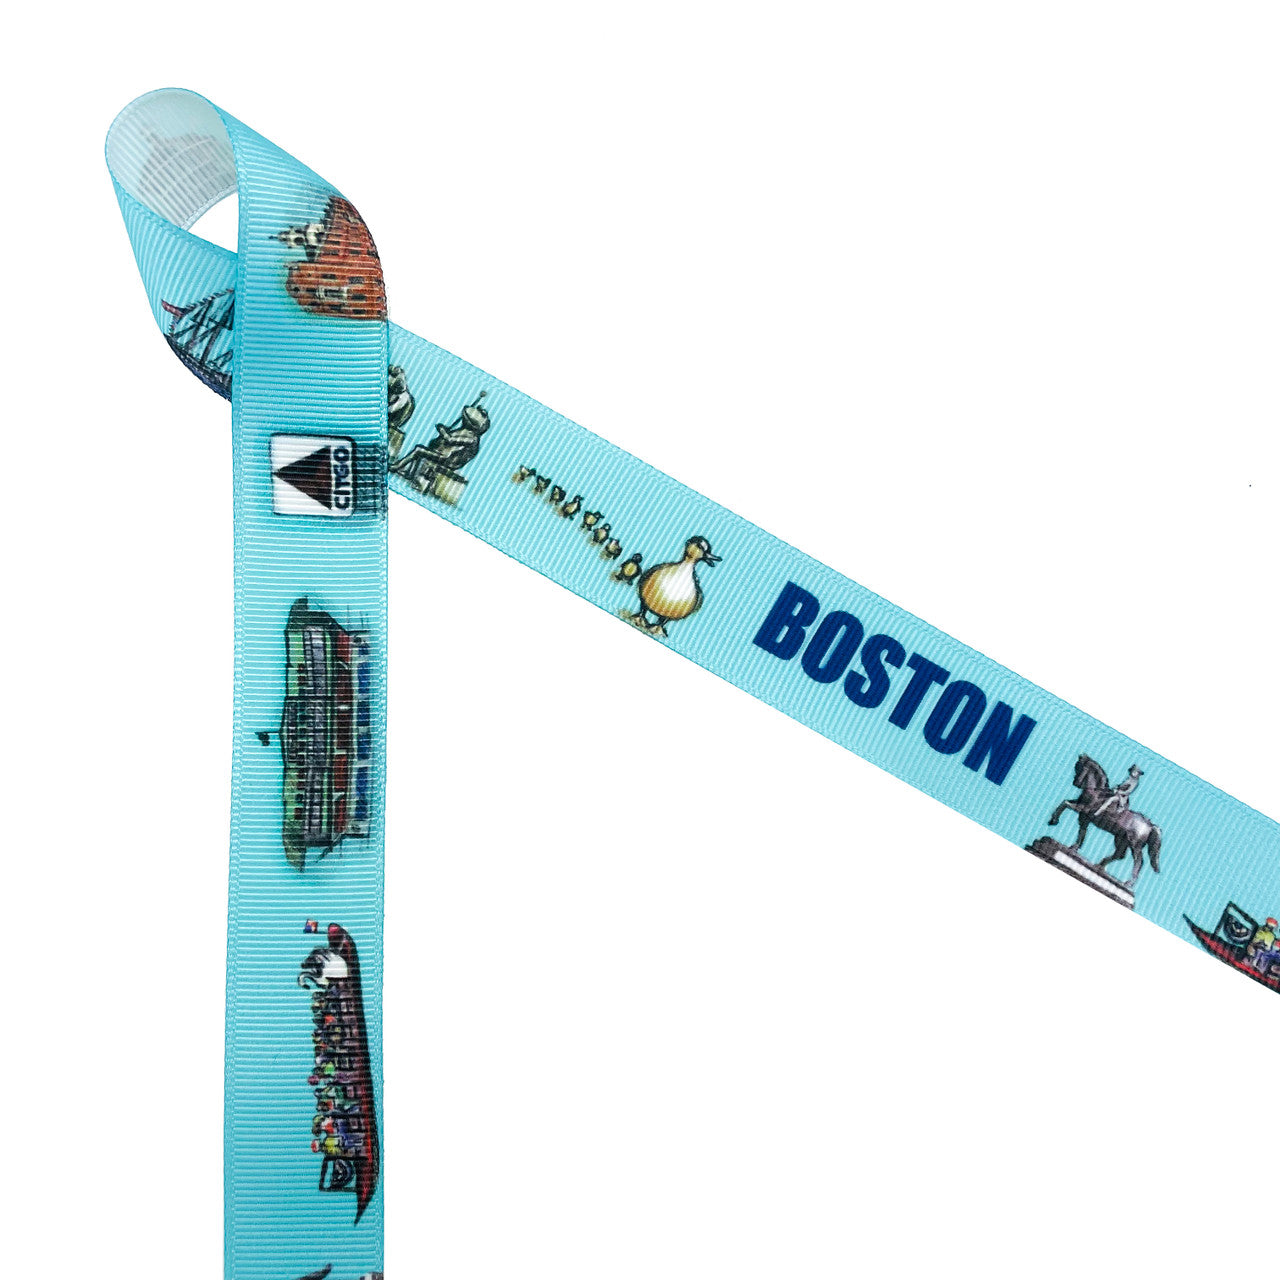 Boston landmark ribbon featuring many of the prominent landmarks of the city printed on 7/8" white grosgrain ribbon is the perfect ribbon for gift wrap, wedding favors, packaging and gift baskets with a Boston theme. This is a fun ribbon for head bands, hair bows and welcome bags too! All our ribbon is designed and printed in the USA